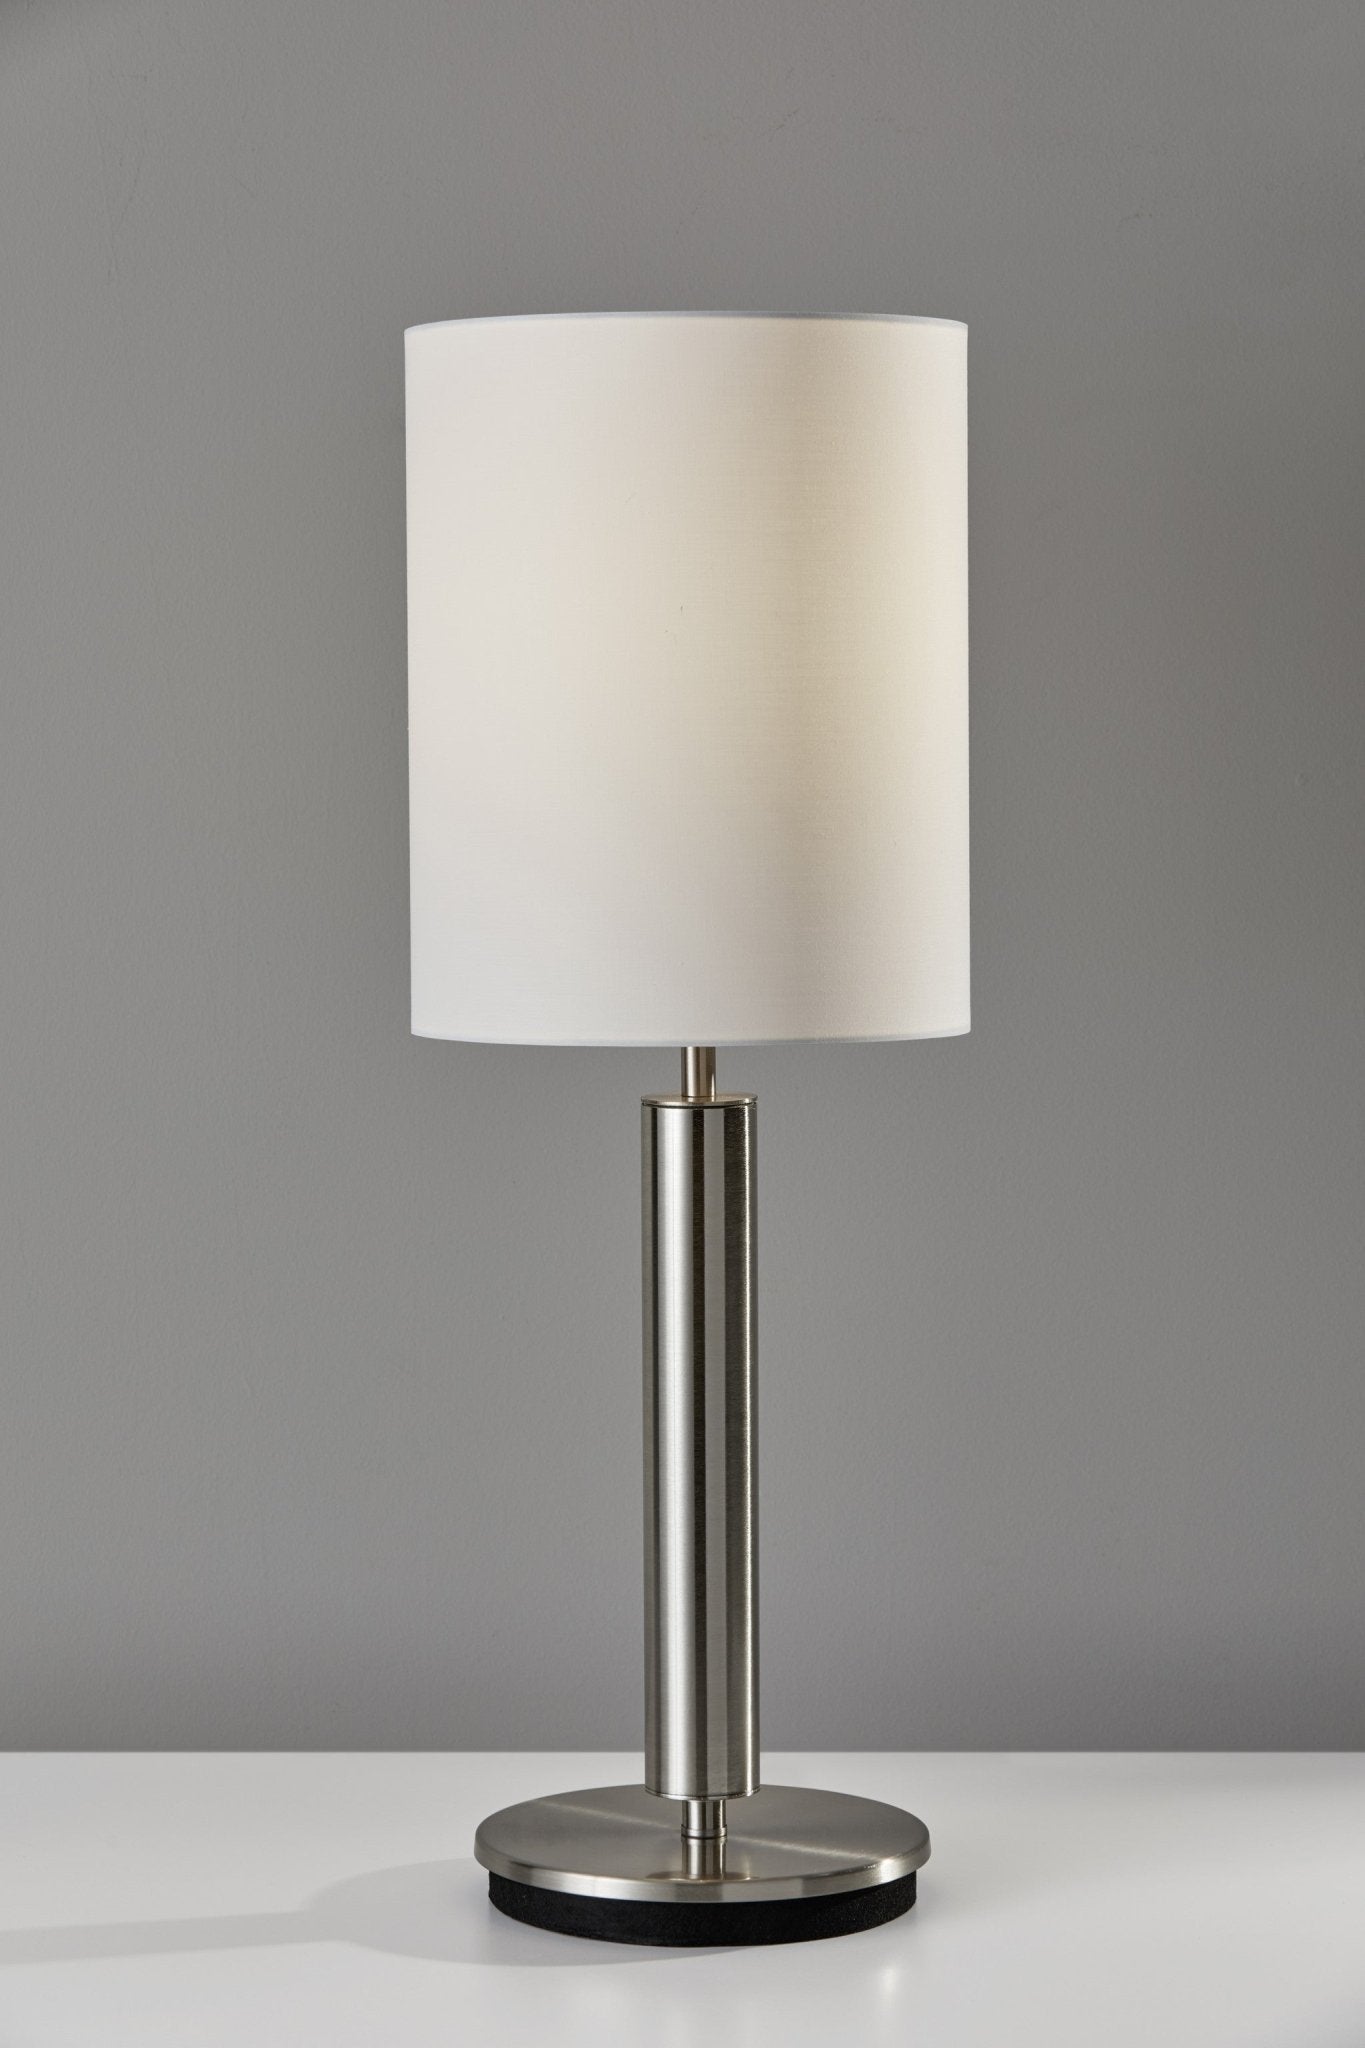 Brushed-Steel-Metal-Stout-Pole-With-Tall-Silk-Shade-Table-Lamp-Table-Lamps